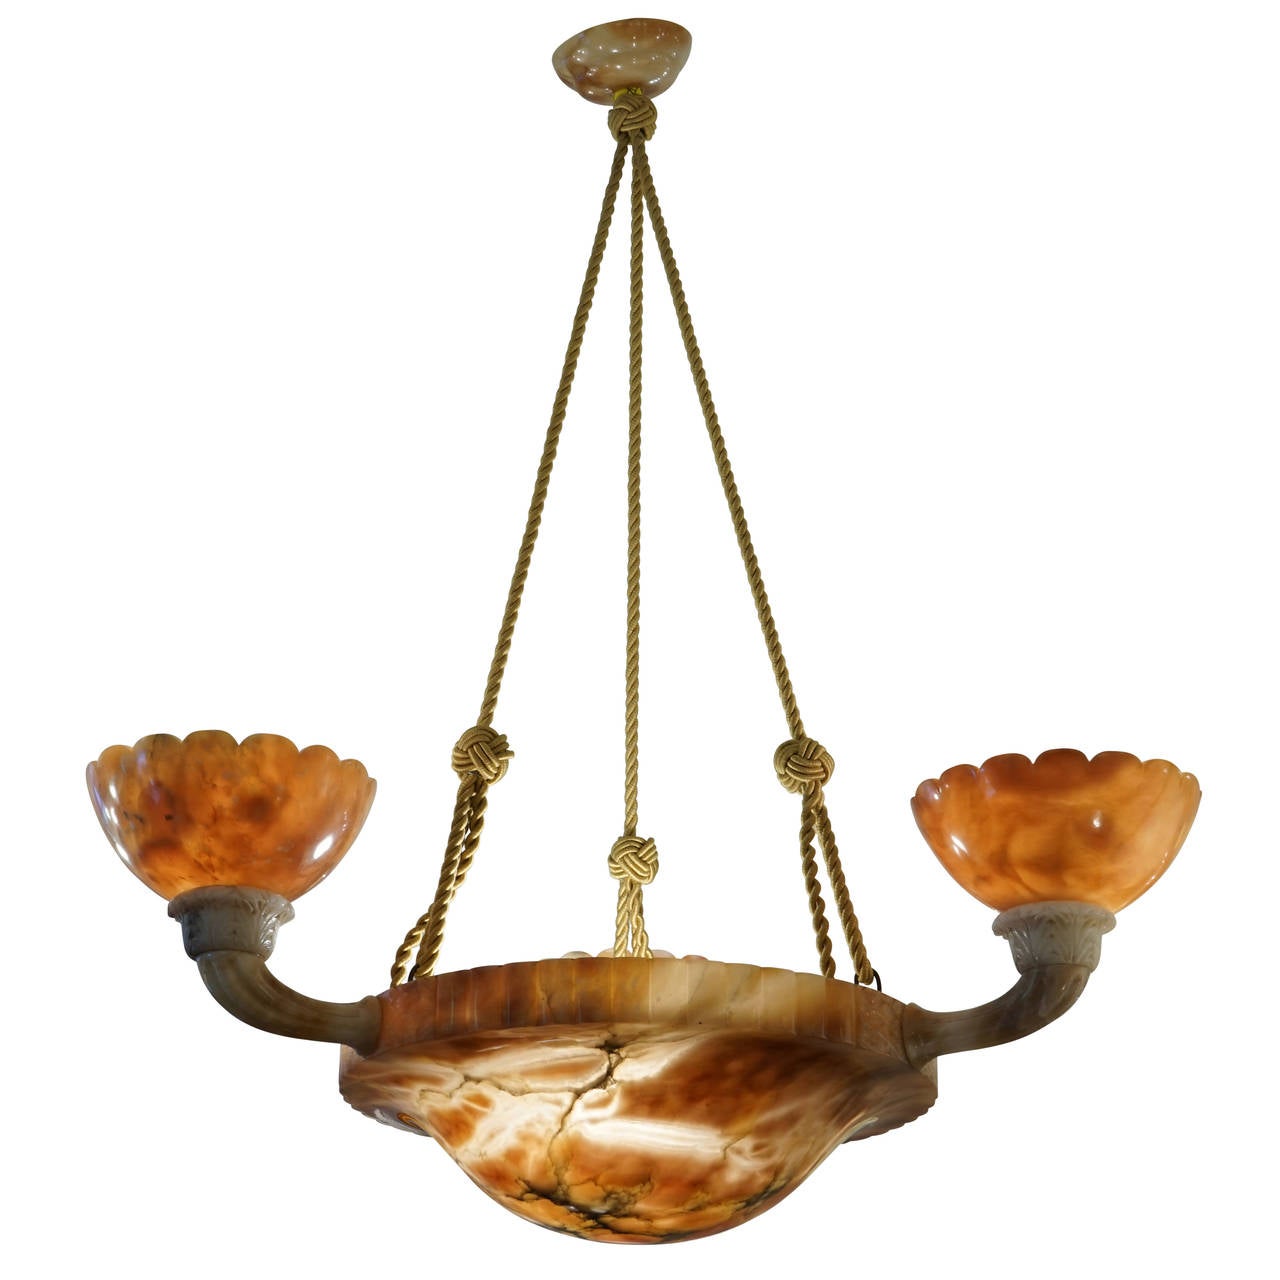 This unique fixture offers the festiveness of a chandelier contrasted with the soothing curves of a pendant. Arms, cups and bowl are all hand-carved of alabaster and hold four 60 watt incandescent bulbs or higher wattage LED bulbs.

Custom